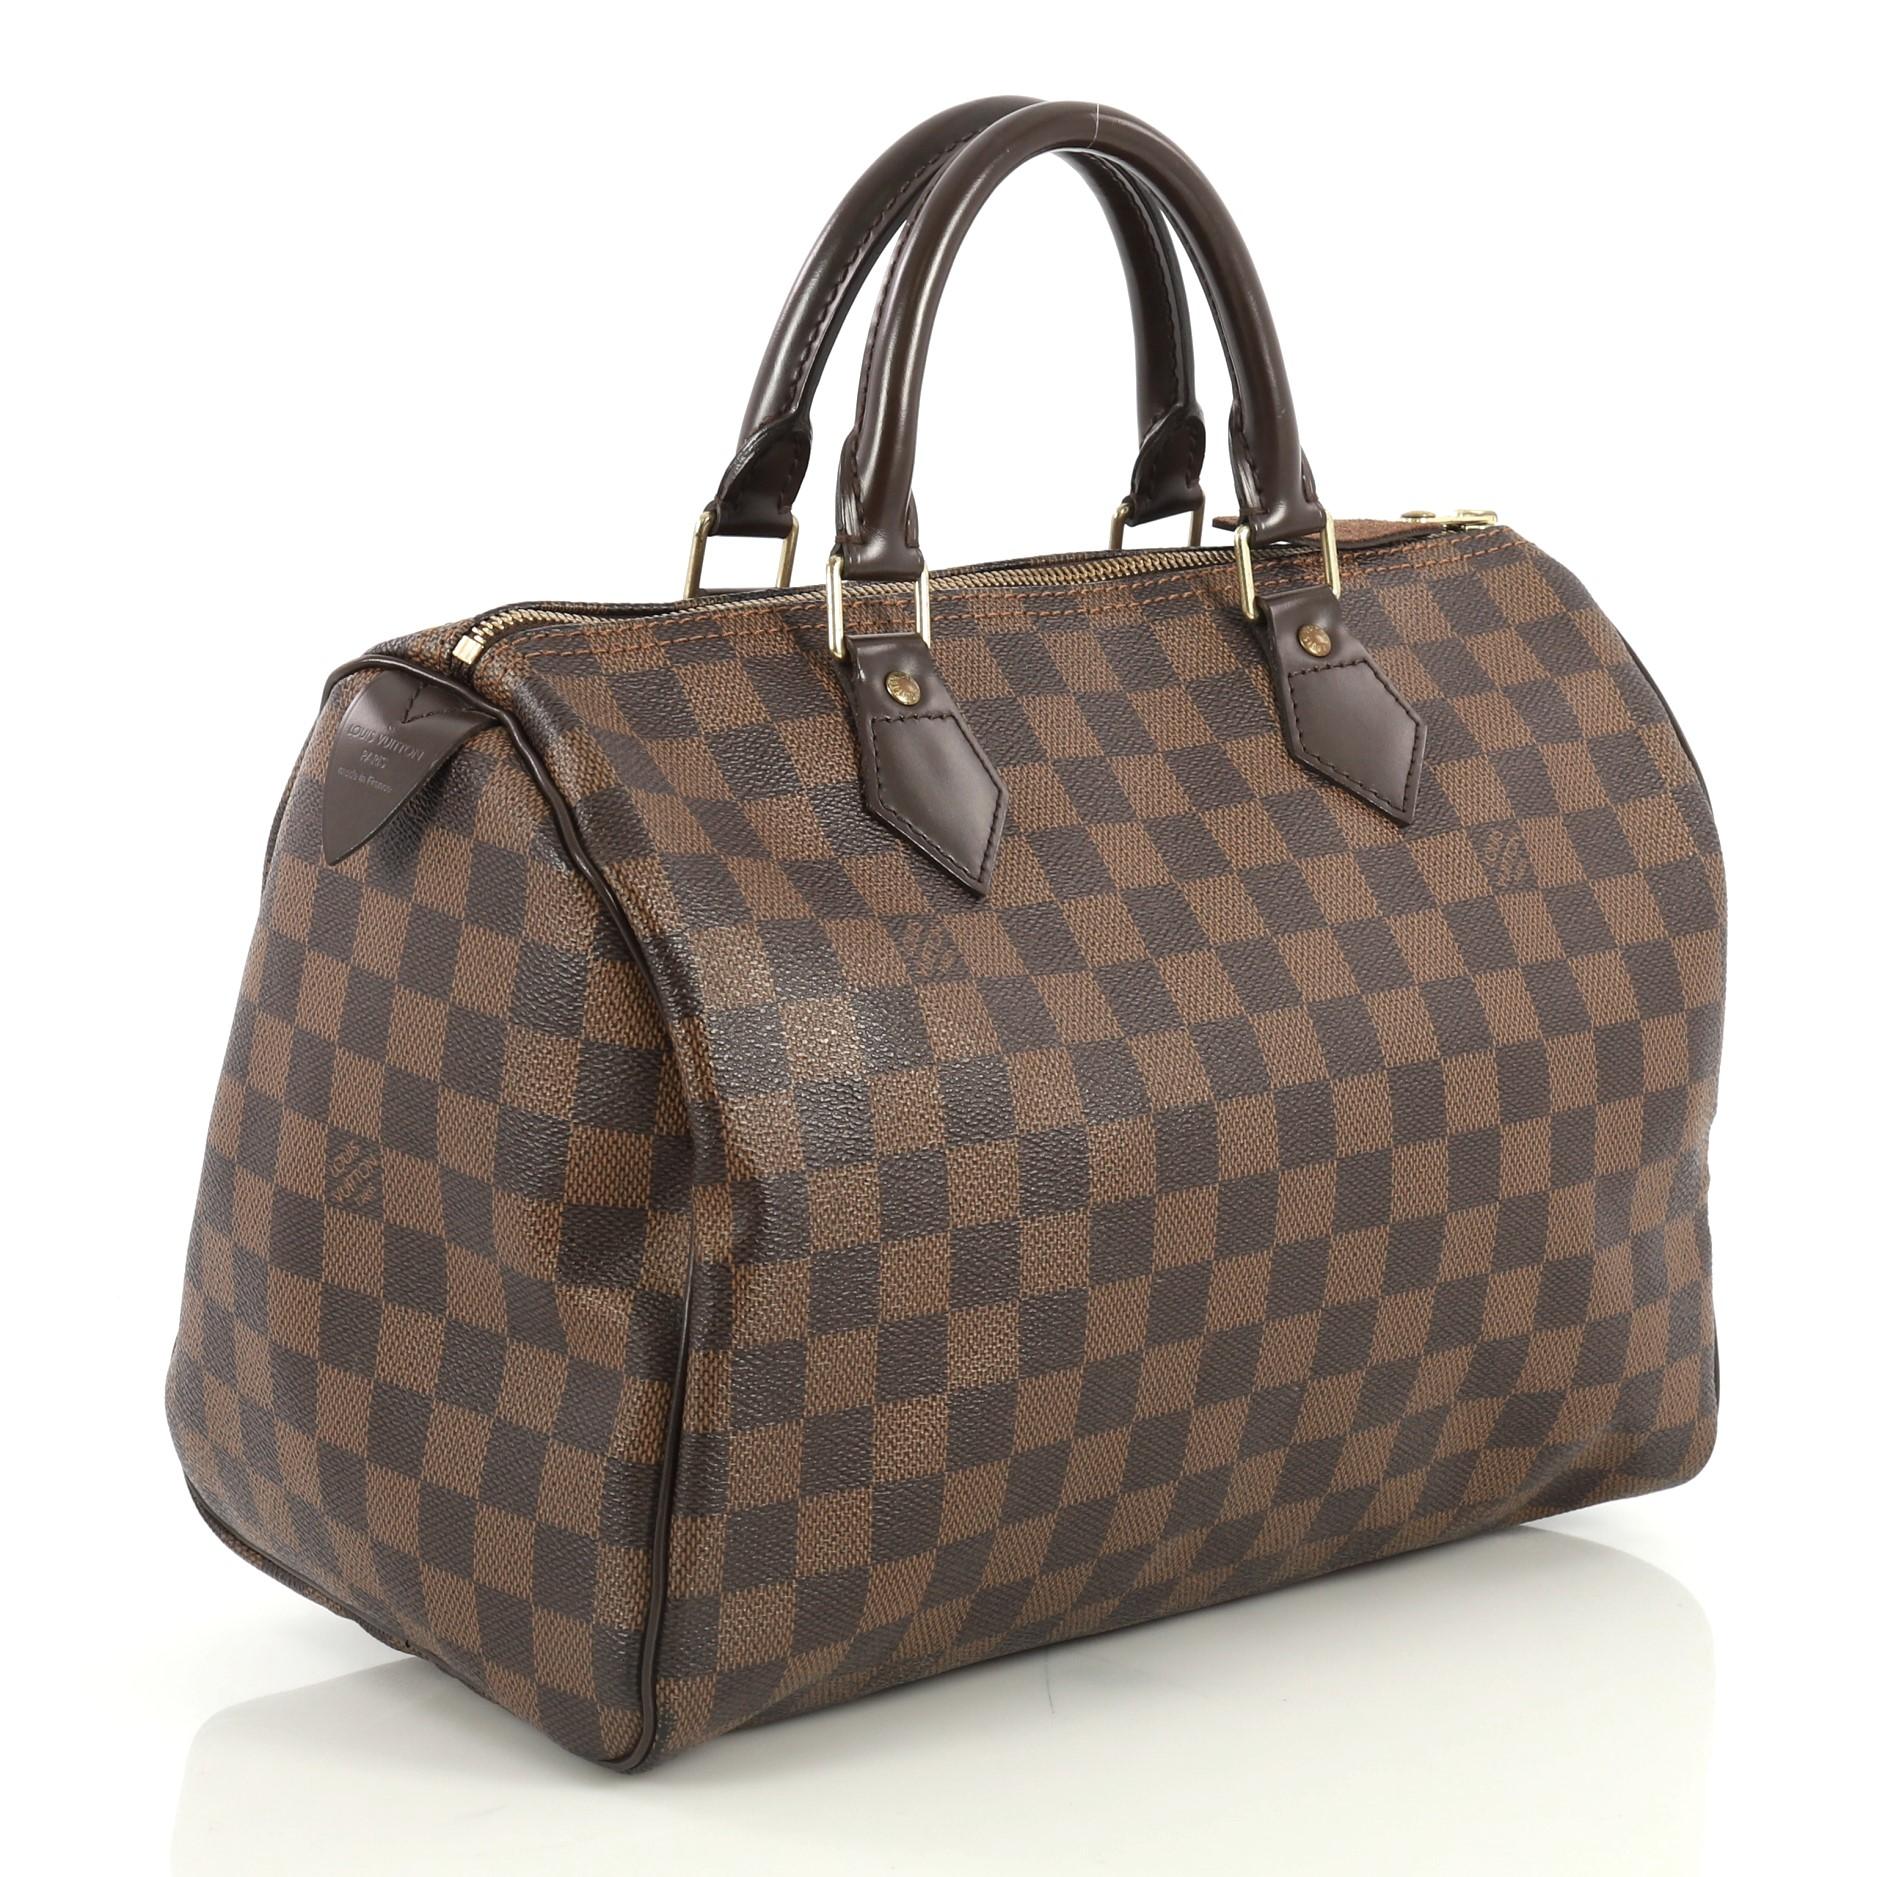 This Louis Vuitton Speedy Handbag Damier 30, crafted in damier ebene coated canvas, features dual rolled handles, leather trim, and gold-tone hardware. Its zip closure opens to a red fabric interior with slip pocket. Authenticity code reads: SP1026.